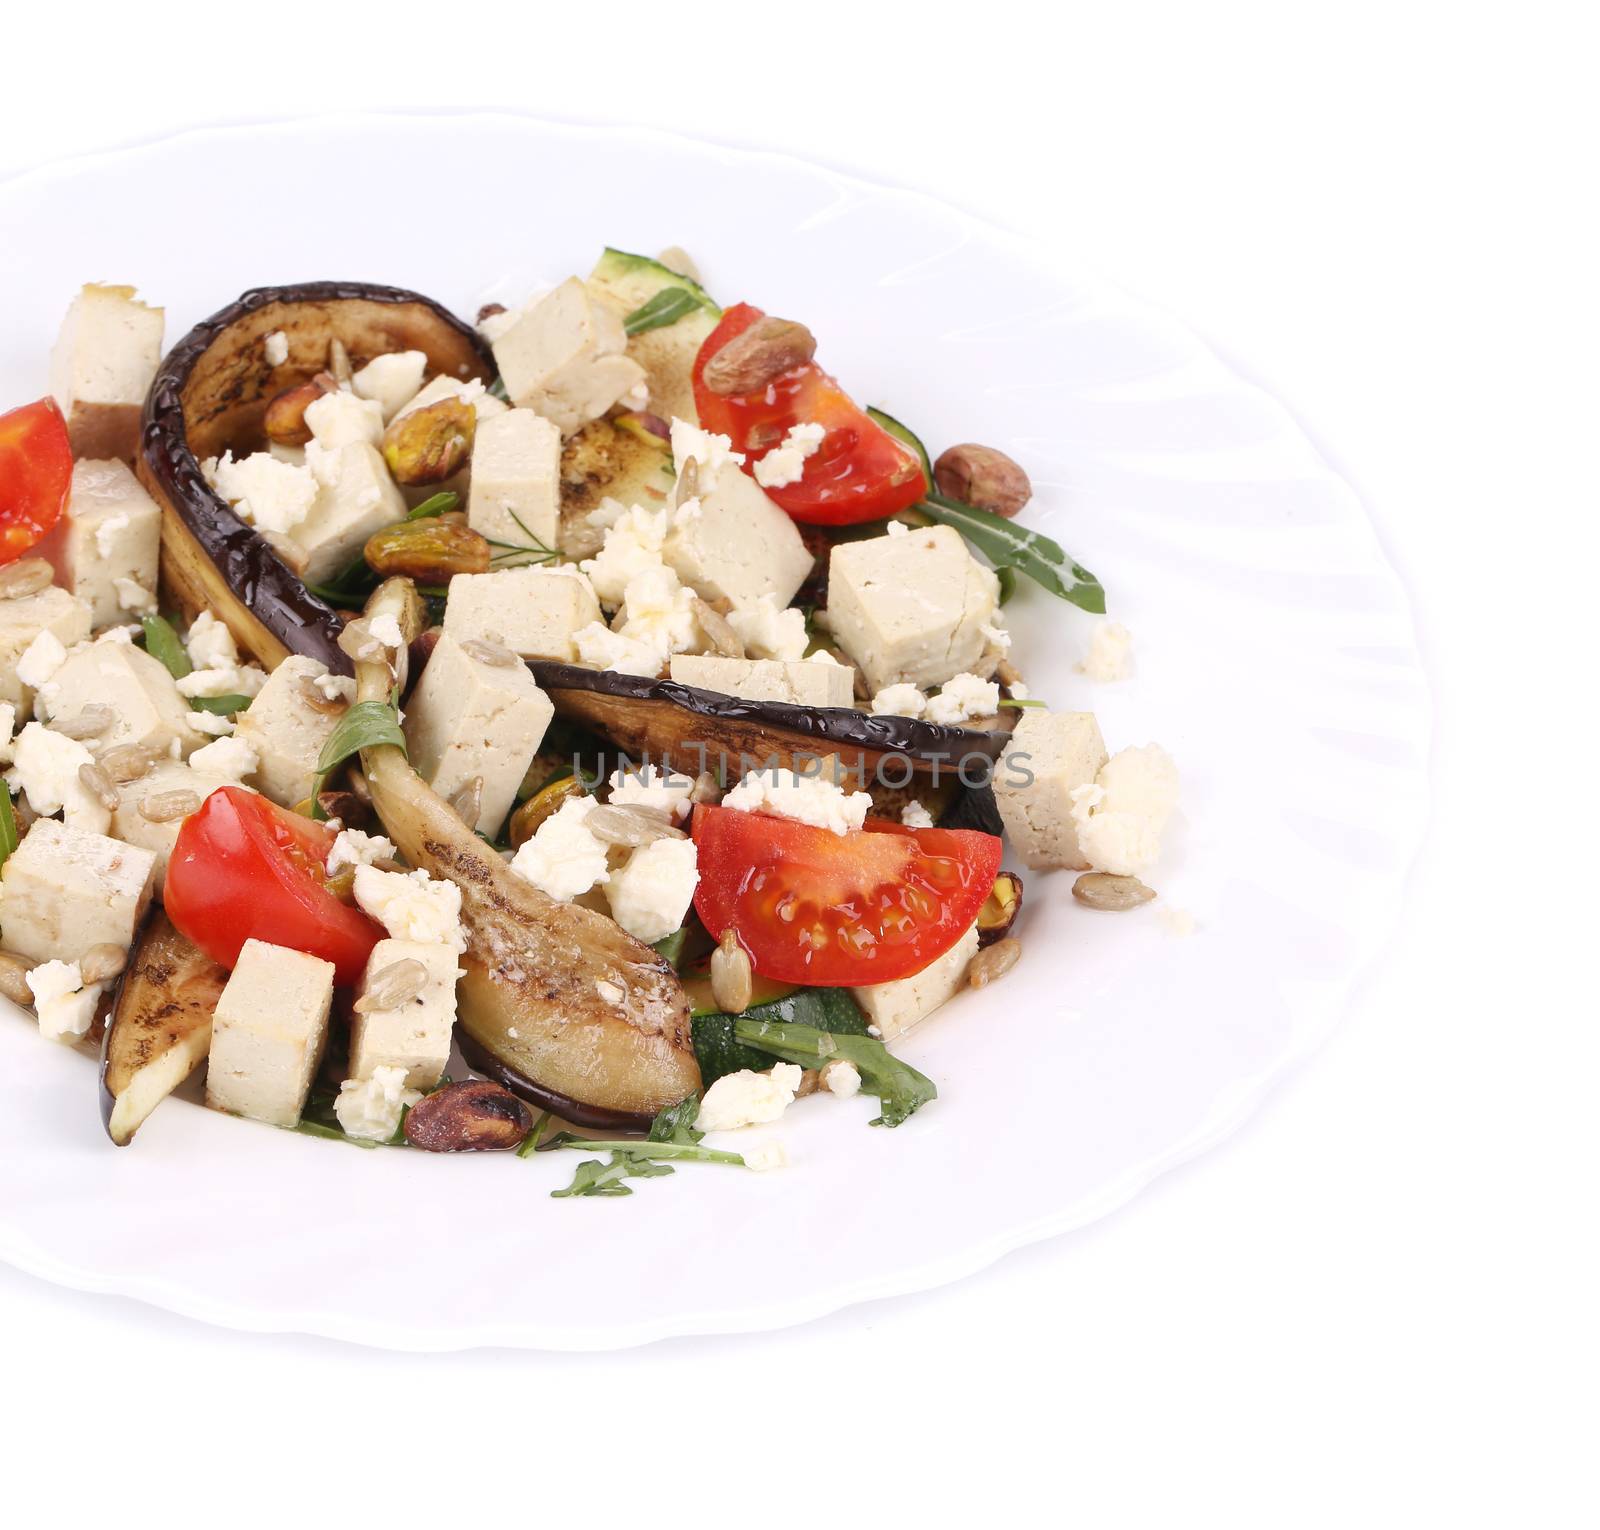 Salad with grilled vegetables and tofu. by indigolotos